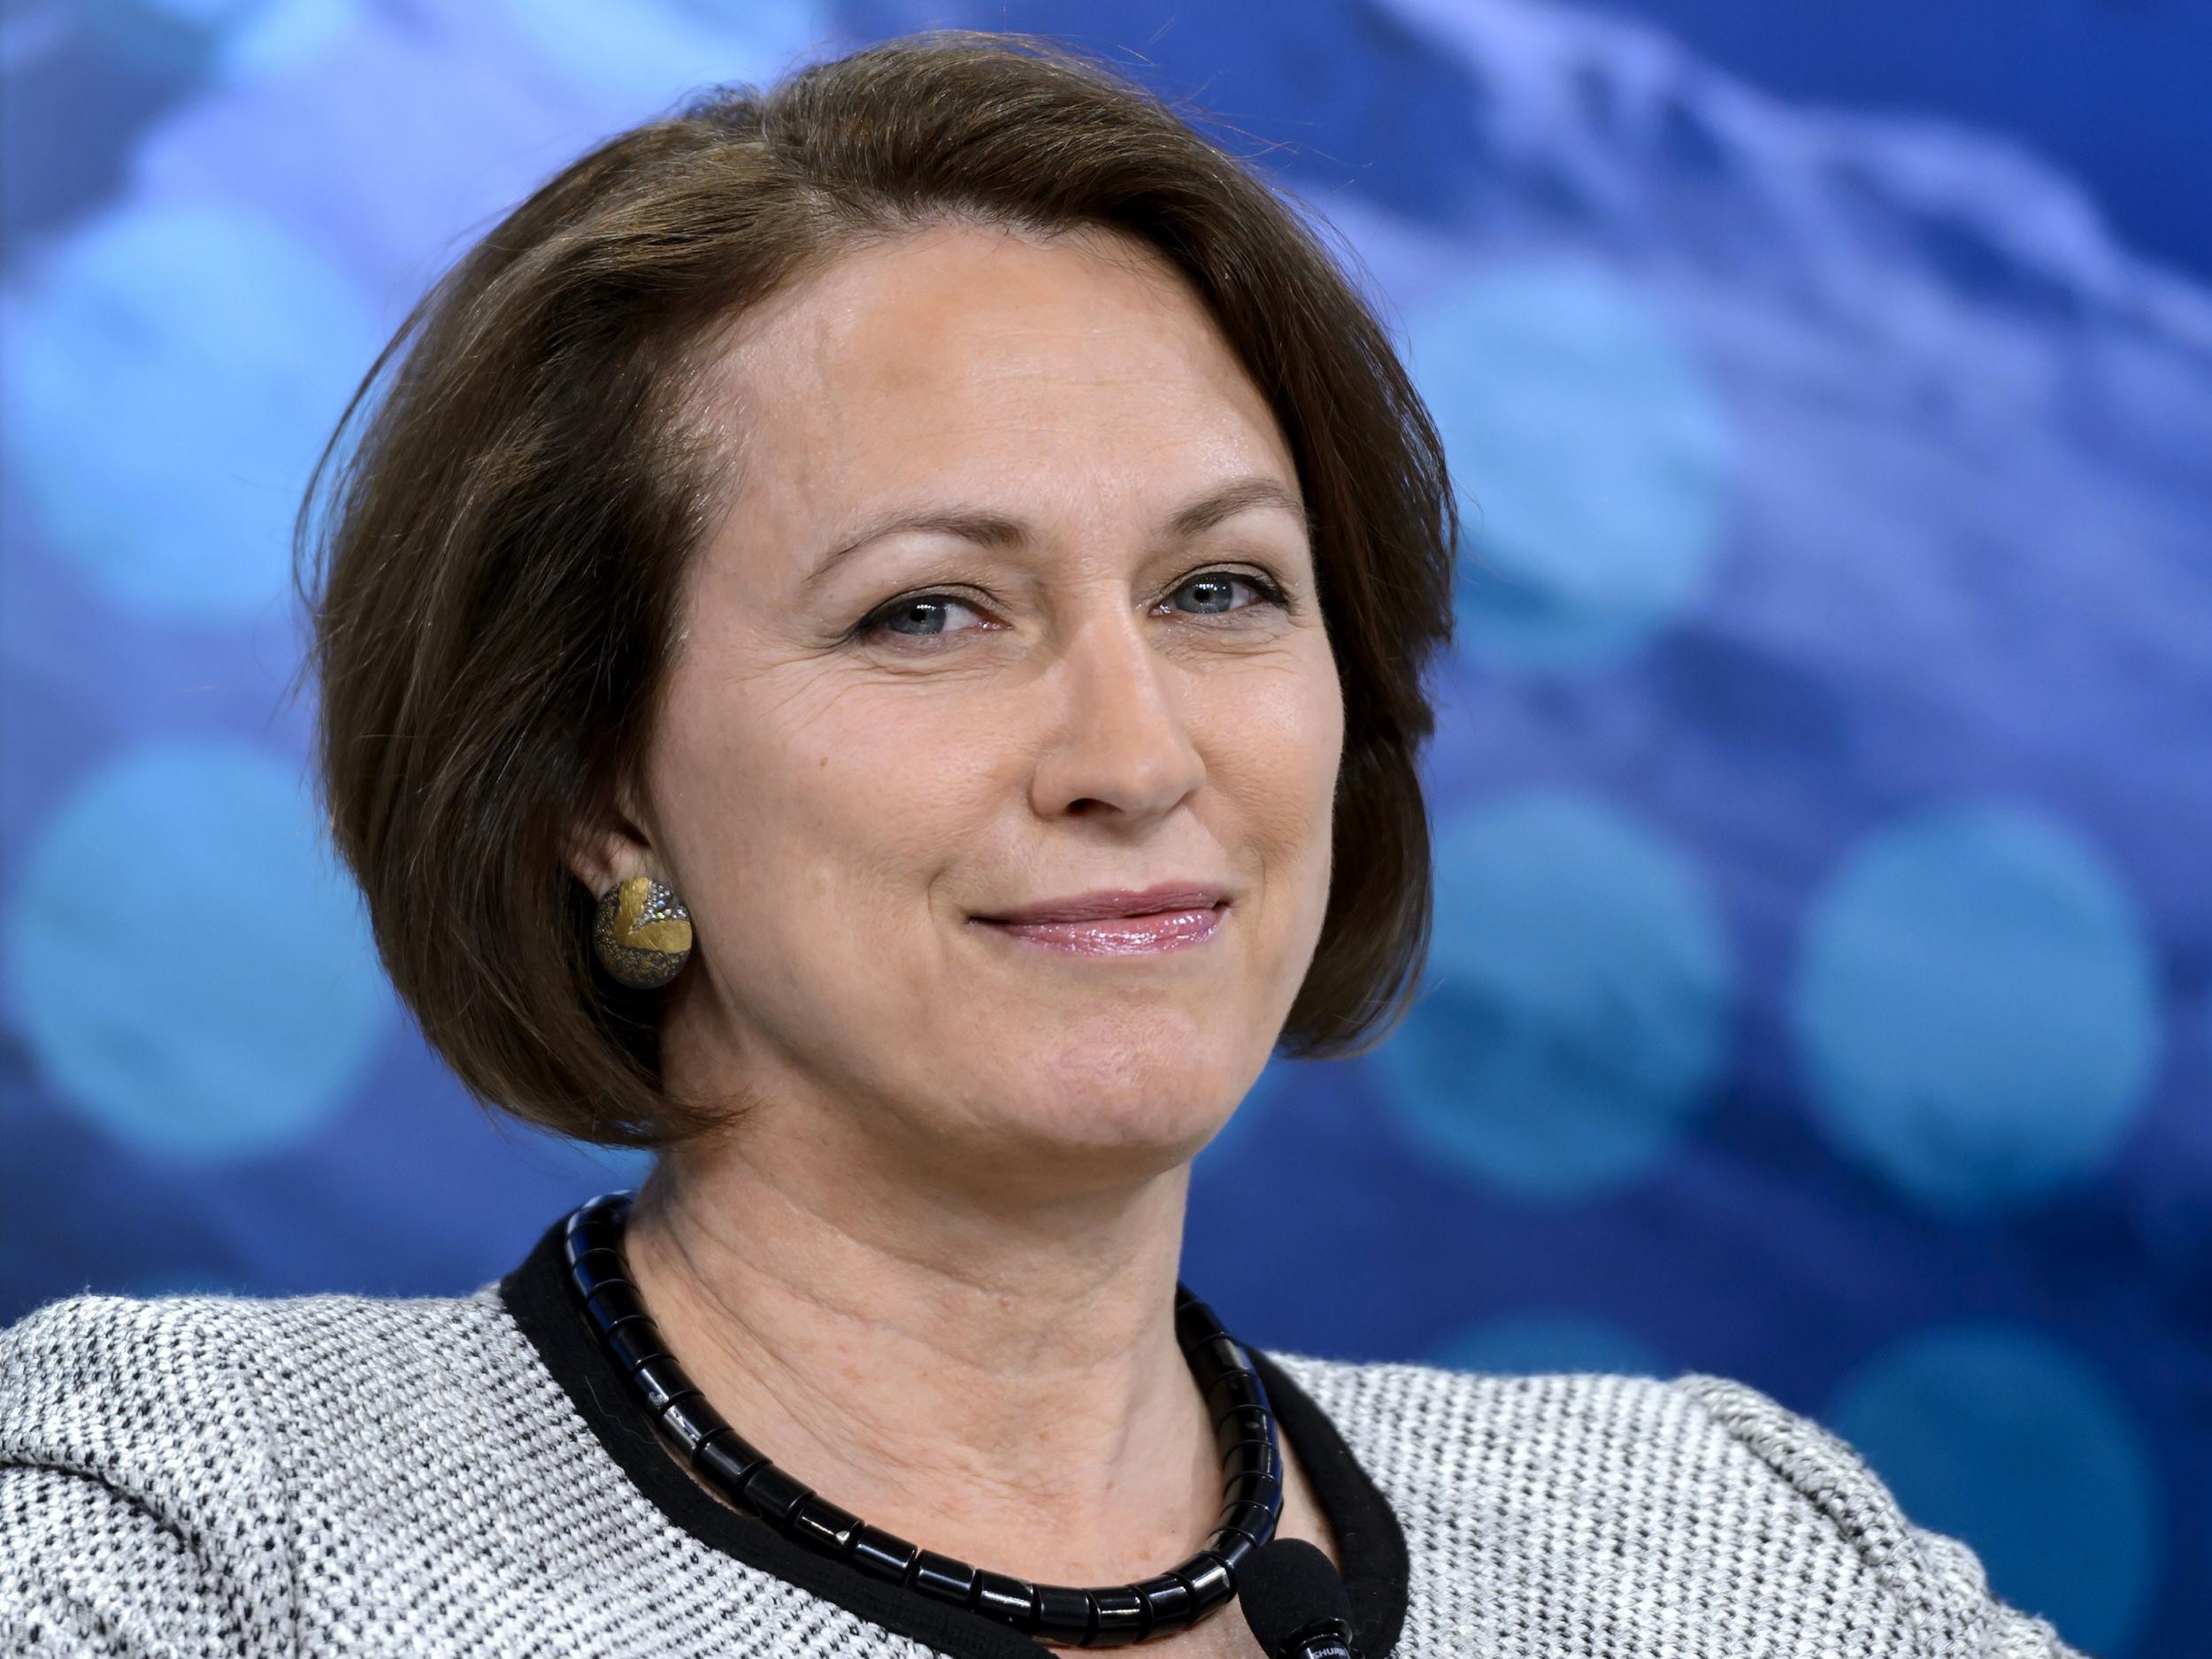 Inga Beale, CEO of Lloyd's of London topped a list of most inspiring LGBT business executives